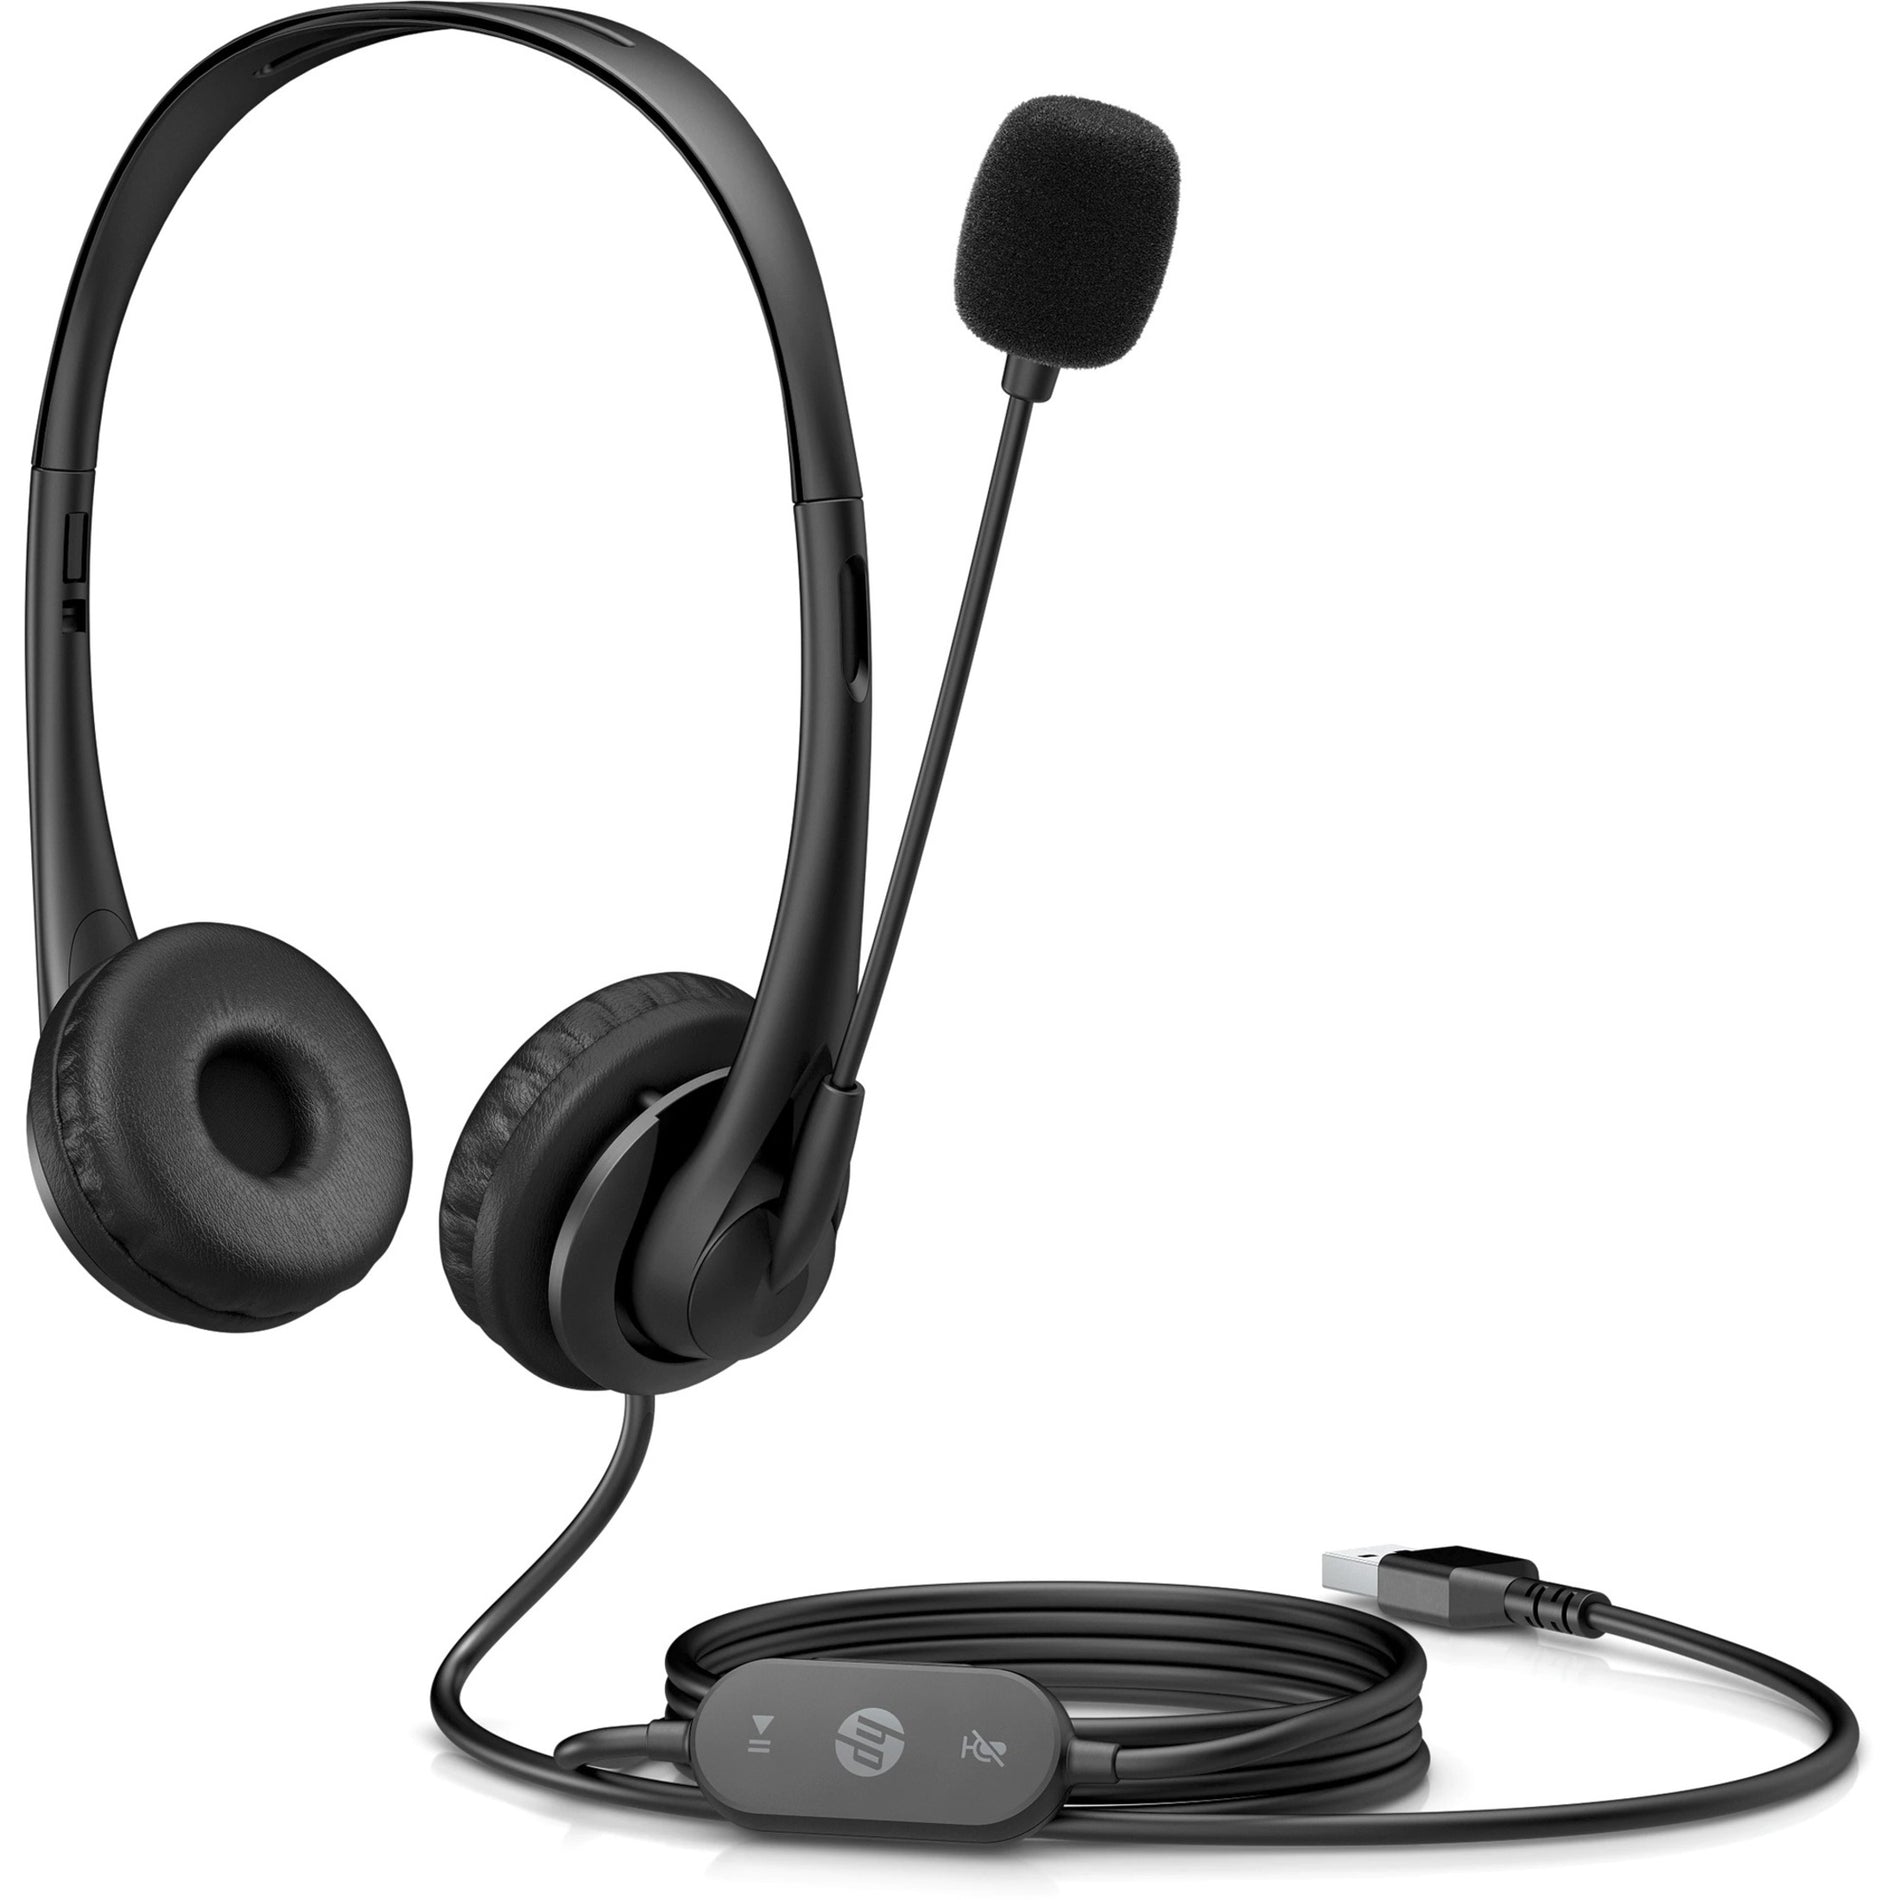 HP 428K6UT Stereo USB Headset G2, Comfortable, Plug and Play, Noise Canceling